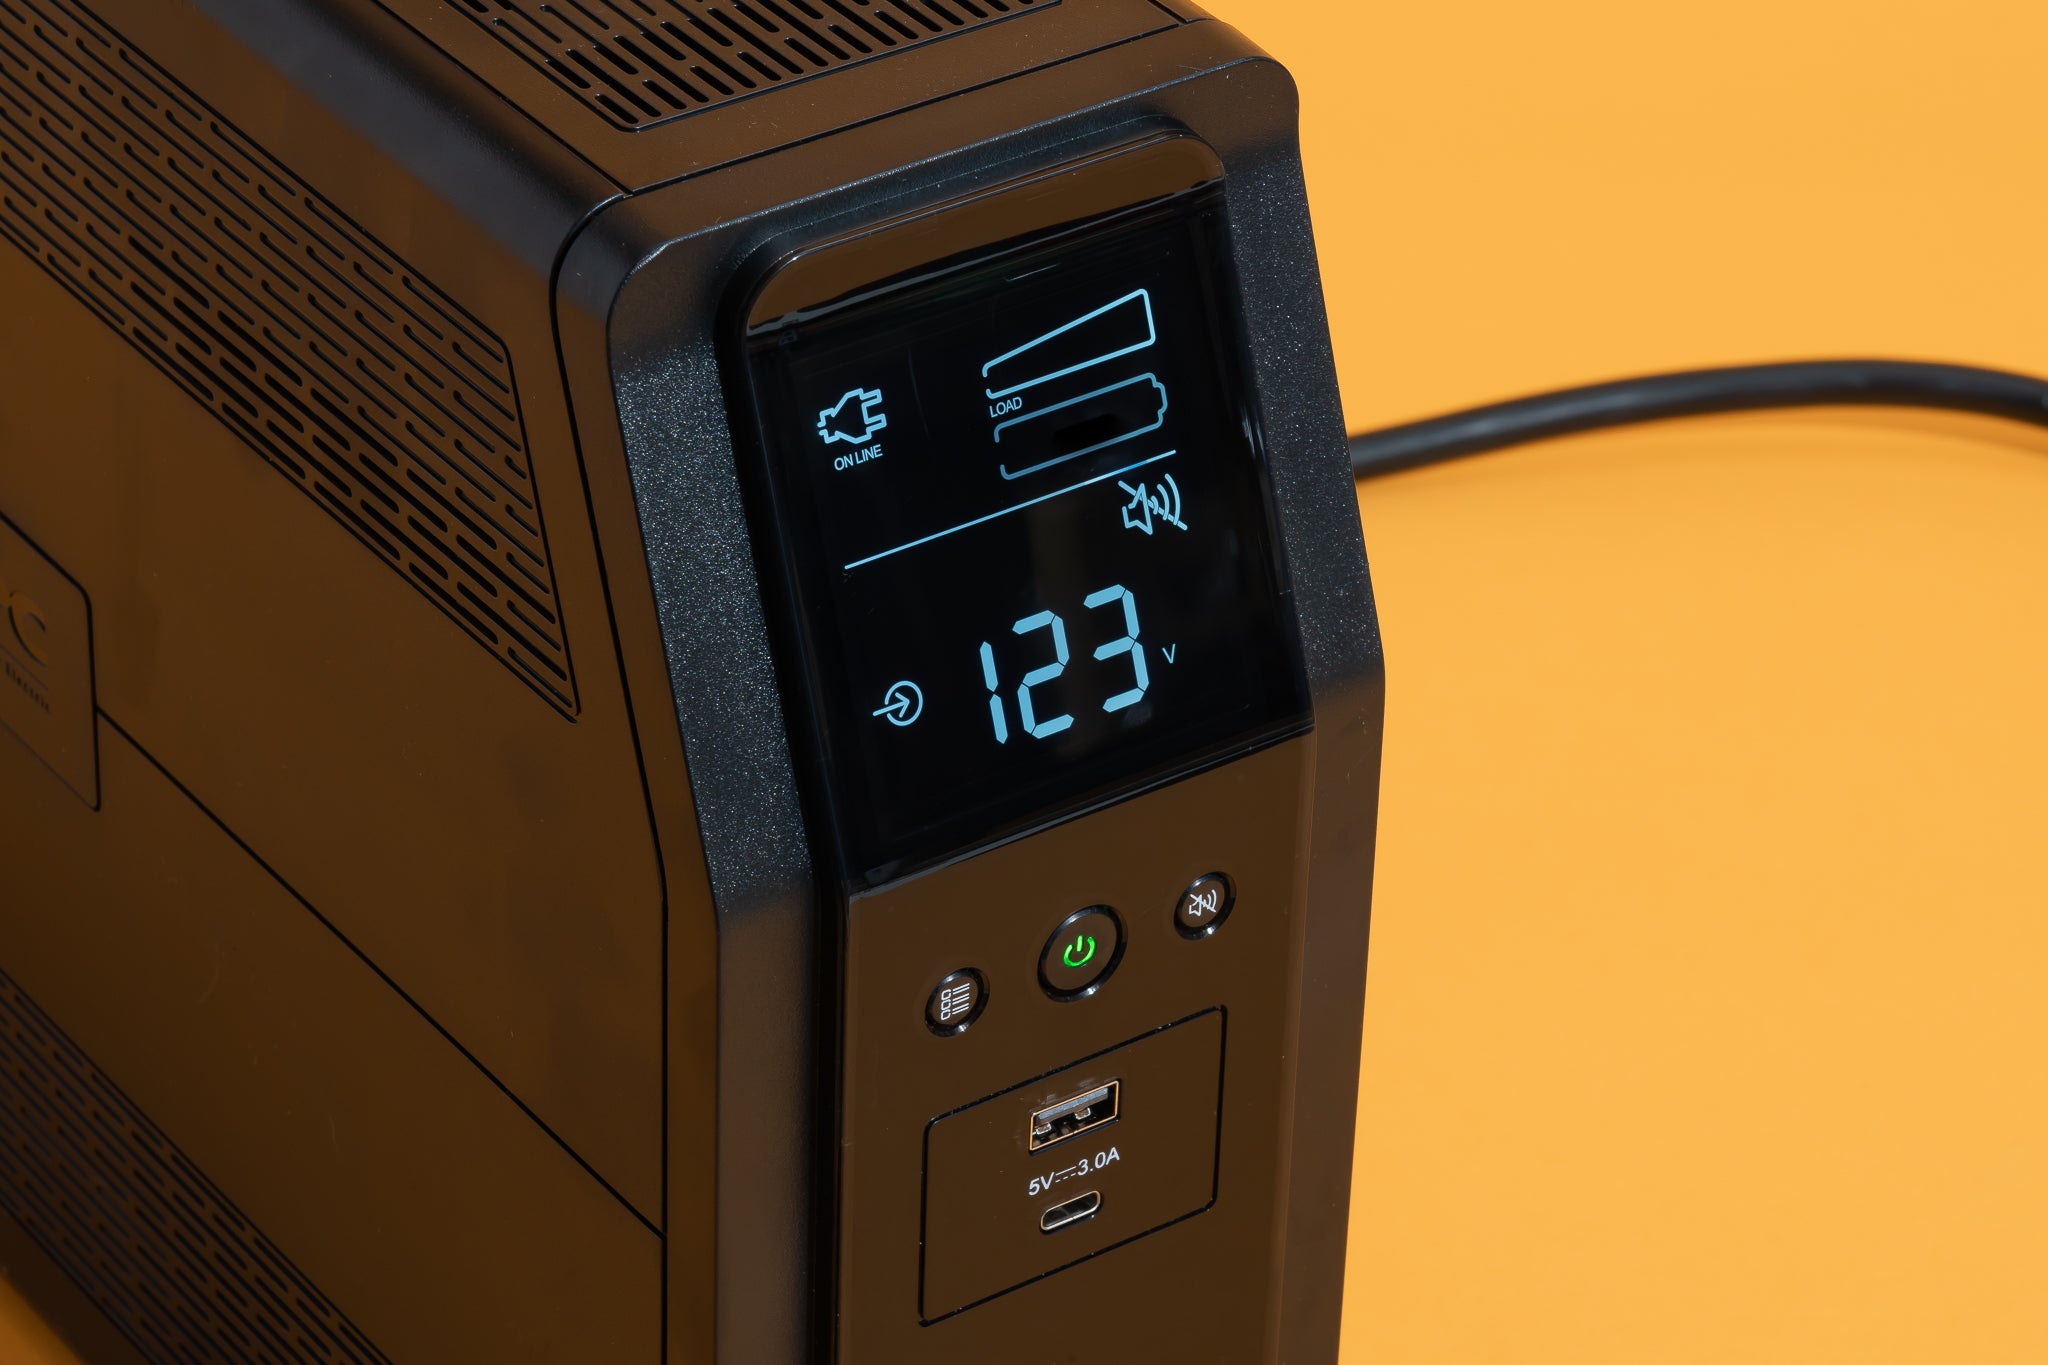 Use a surge protector or uninterruptible power supply (UPS) to protect the hard drive from voltage fluctuations.
Check the power supply unit (PSU) for any issues and replace if necessary.